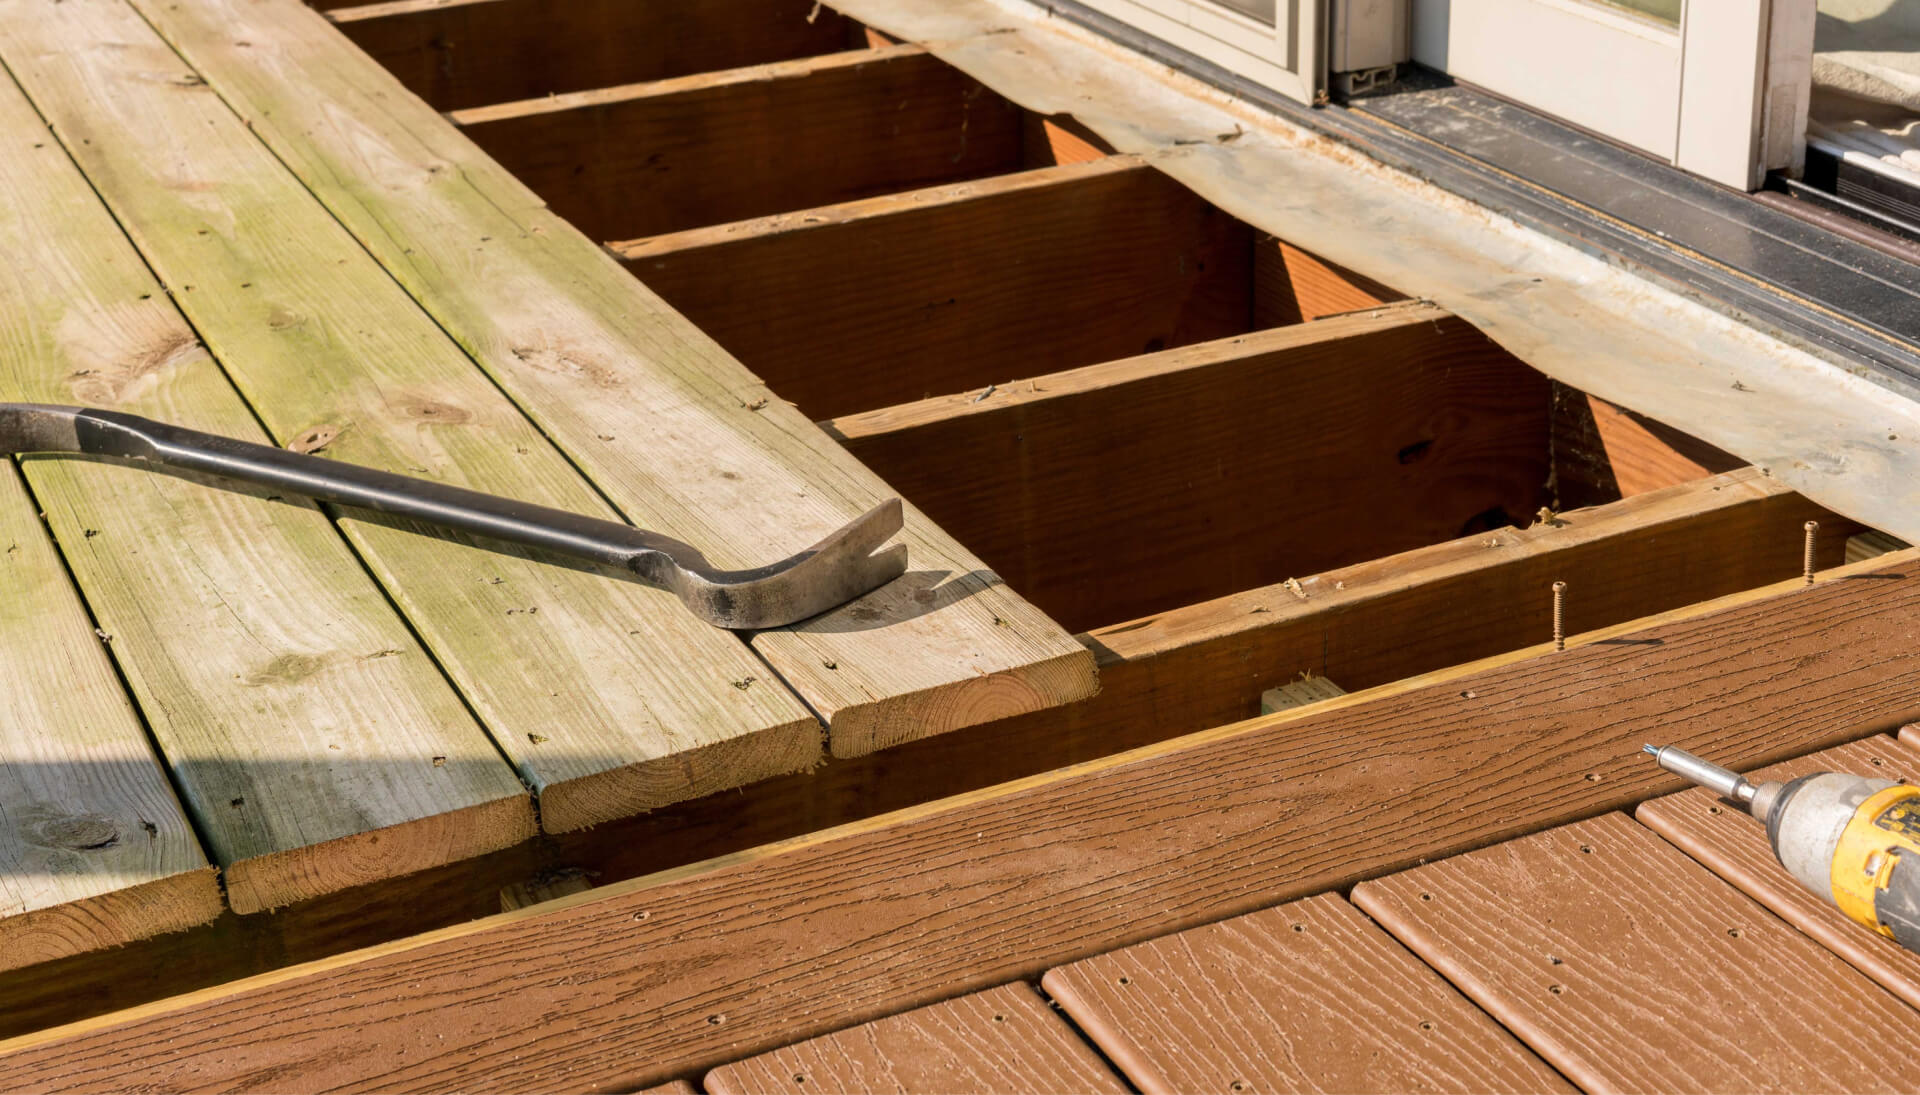 A professional deck repair service in Hampton, providing thorough inspections and maintenance to ensure the safety and durability of the structure